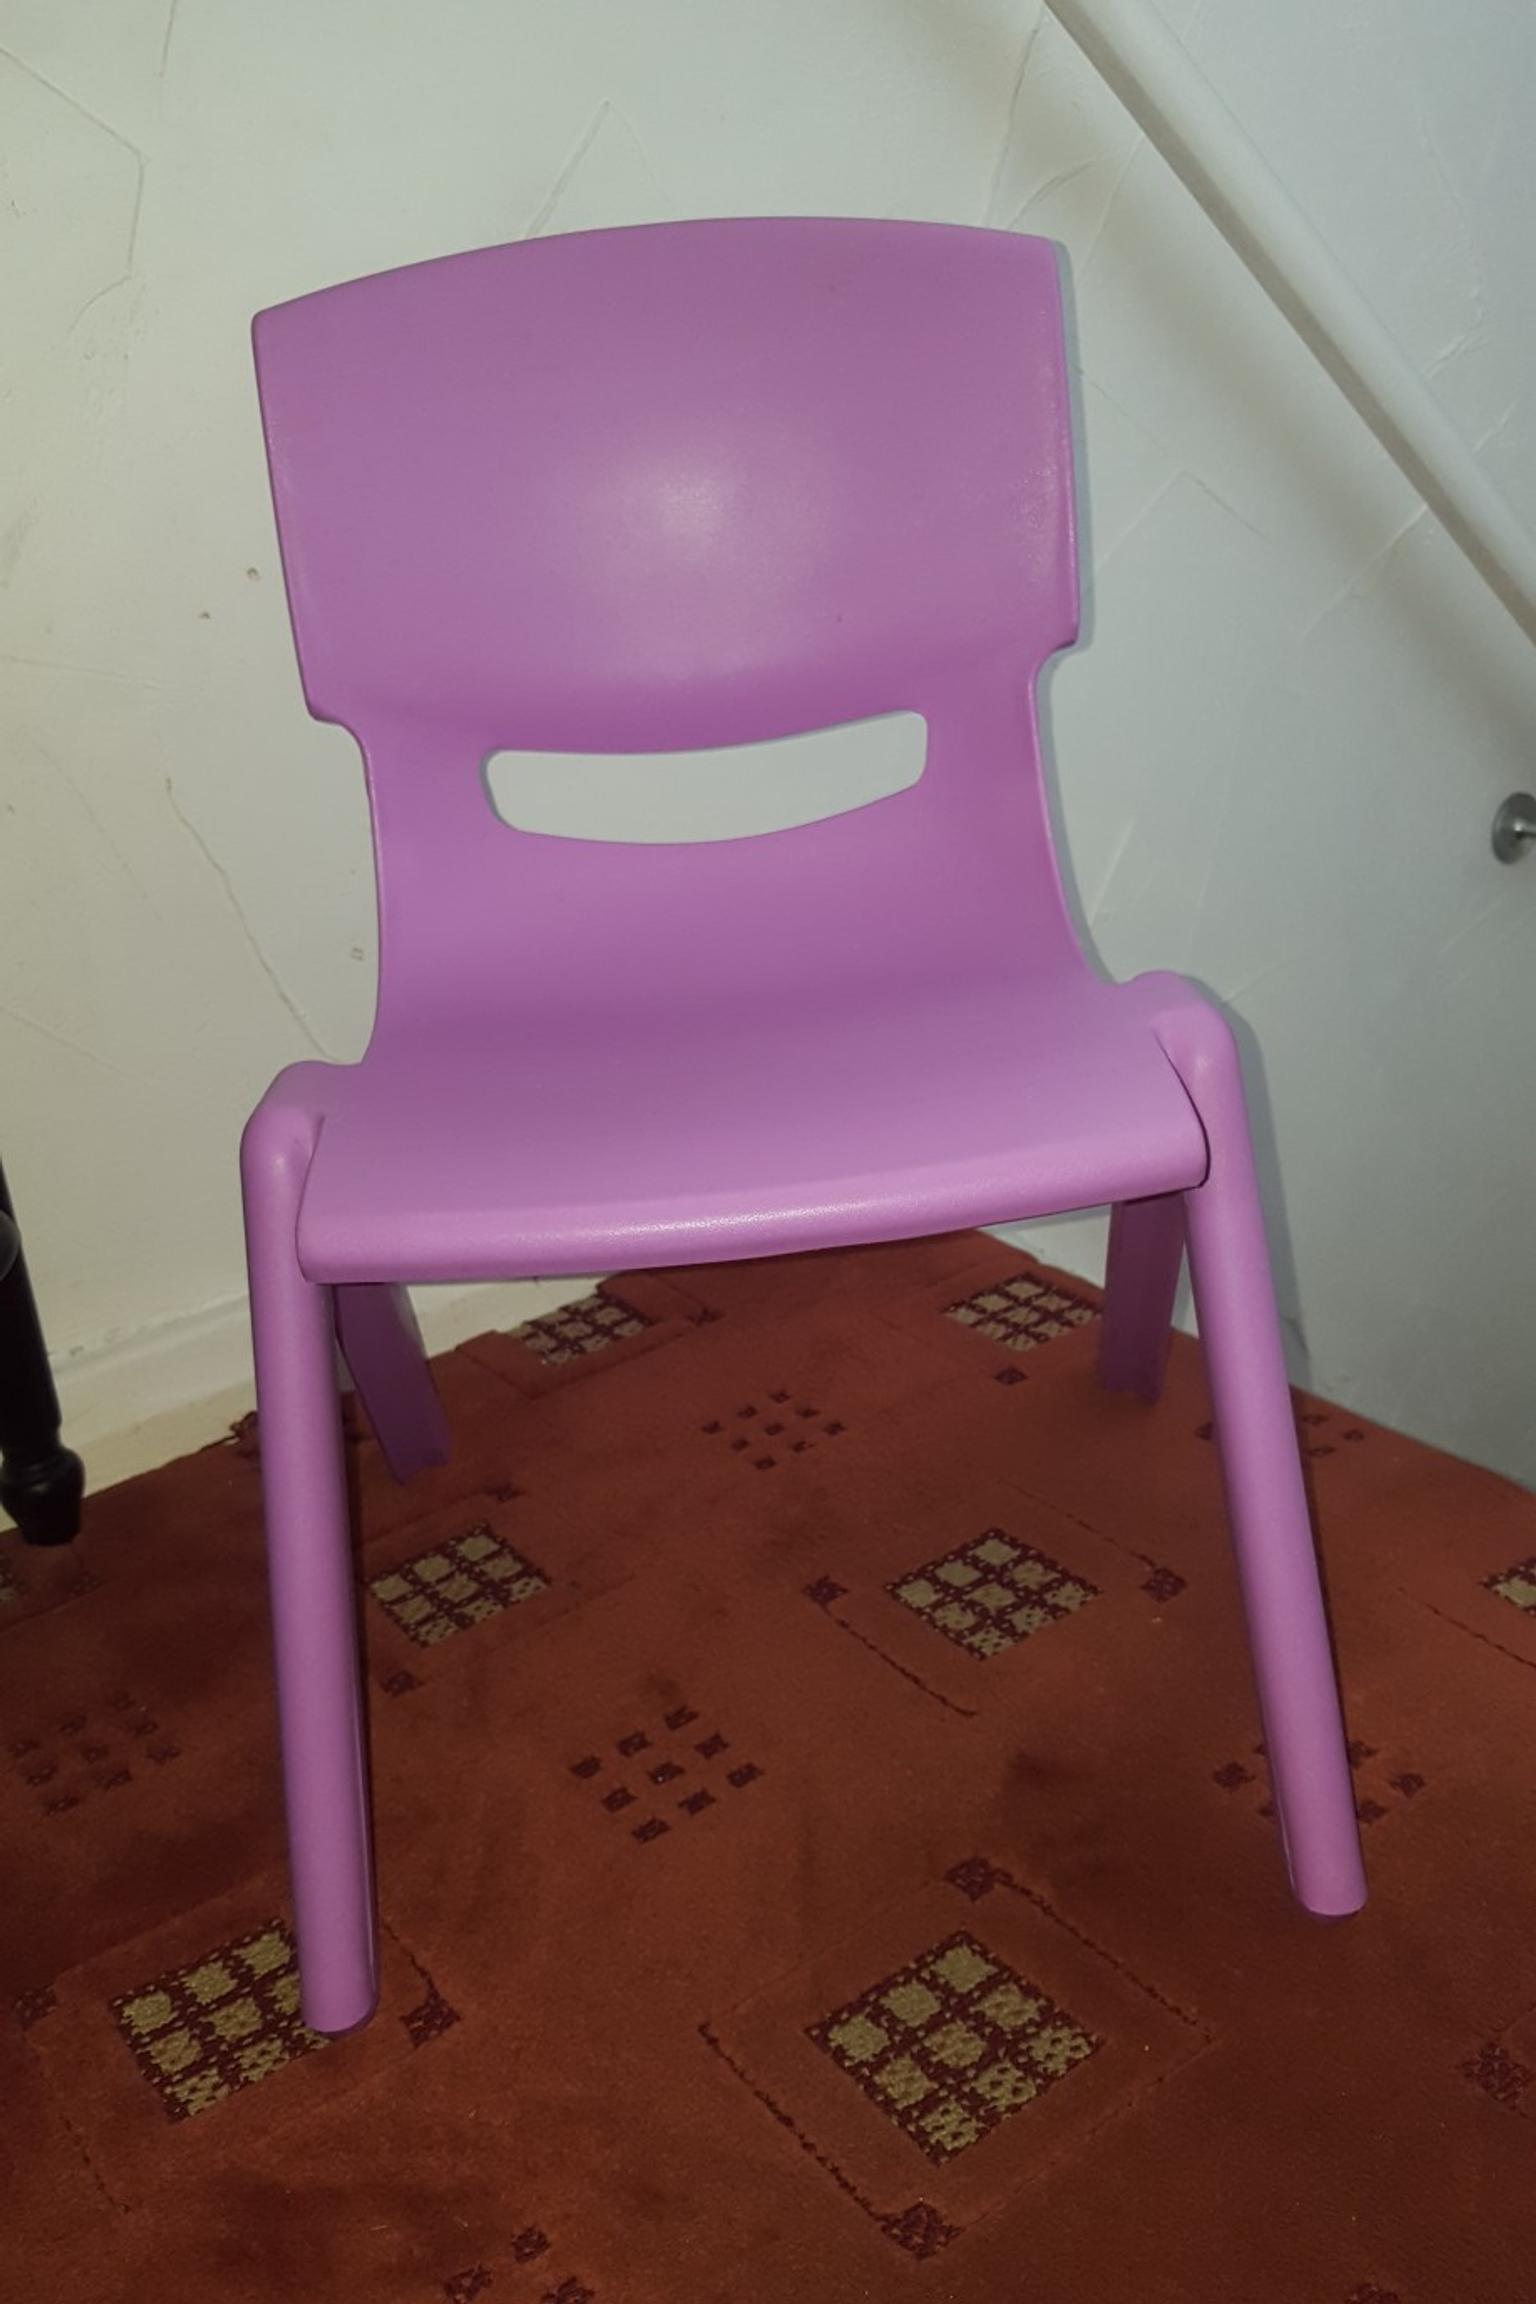 childrens plastic chairs home bargains